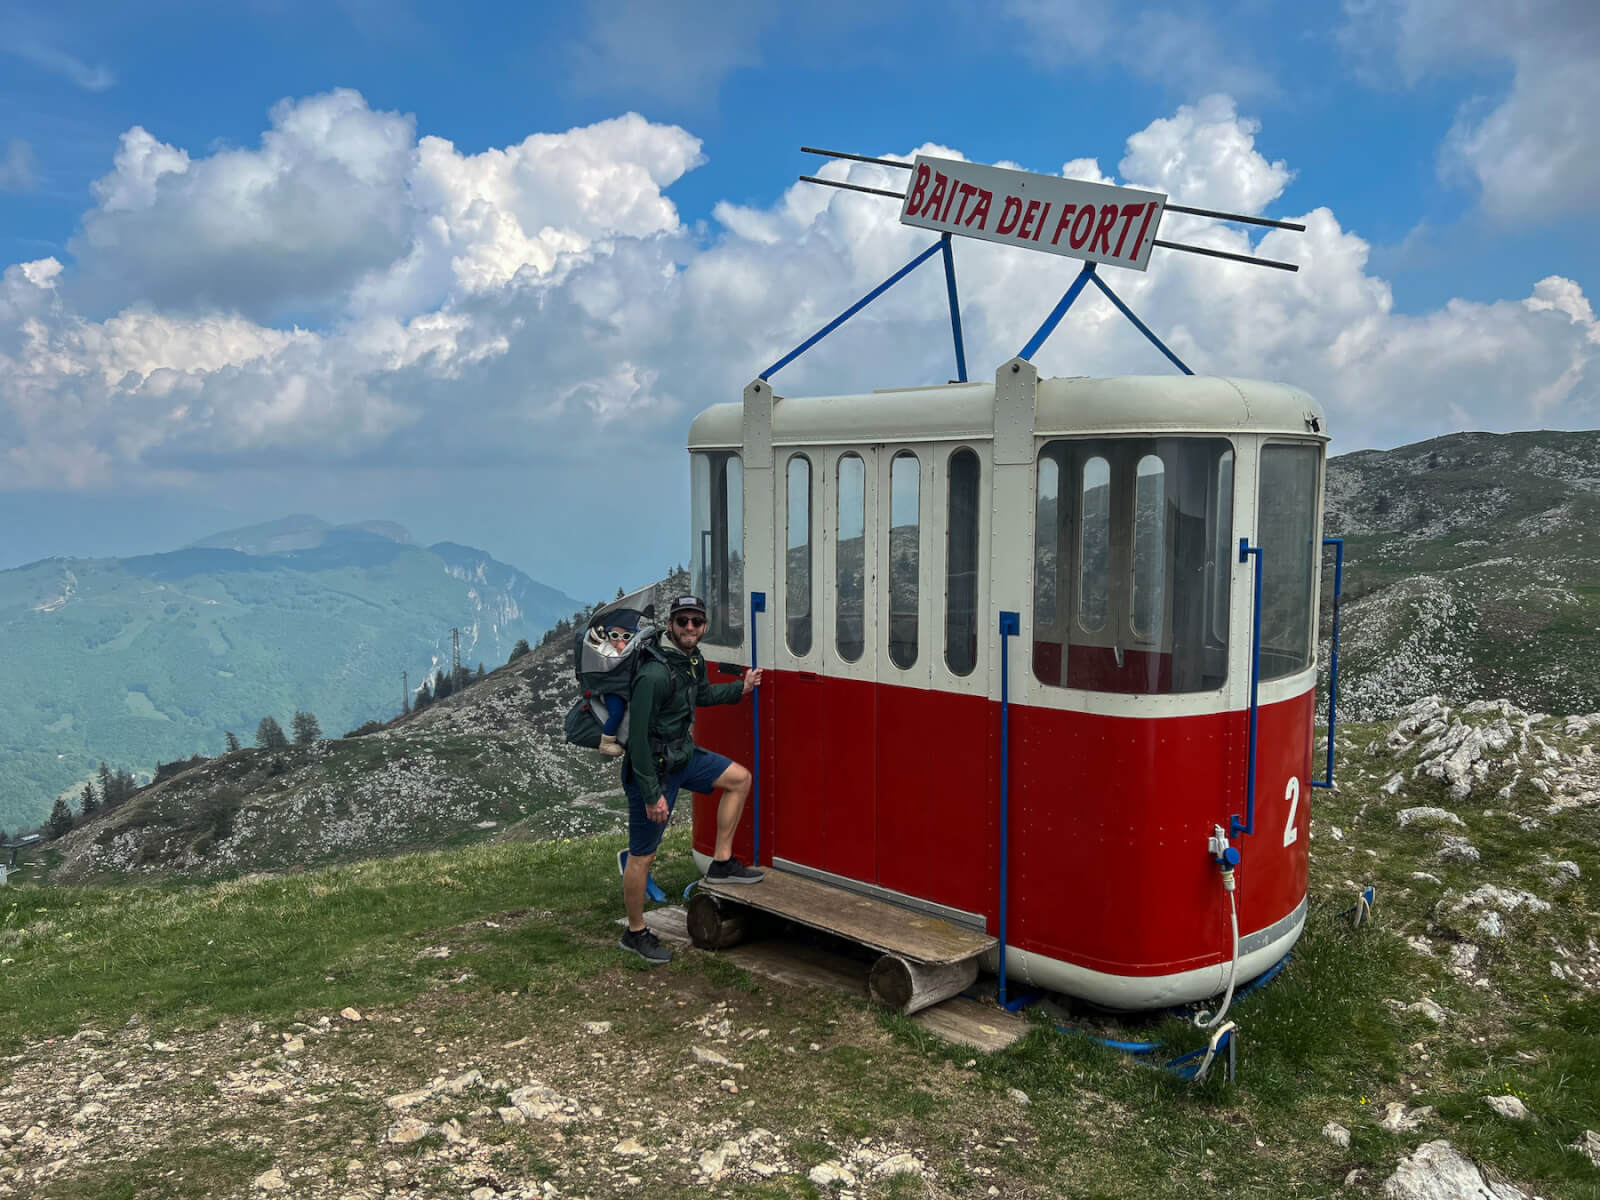 A man and baby hiking on  Monte Baldo, standing next to an old cable car.